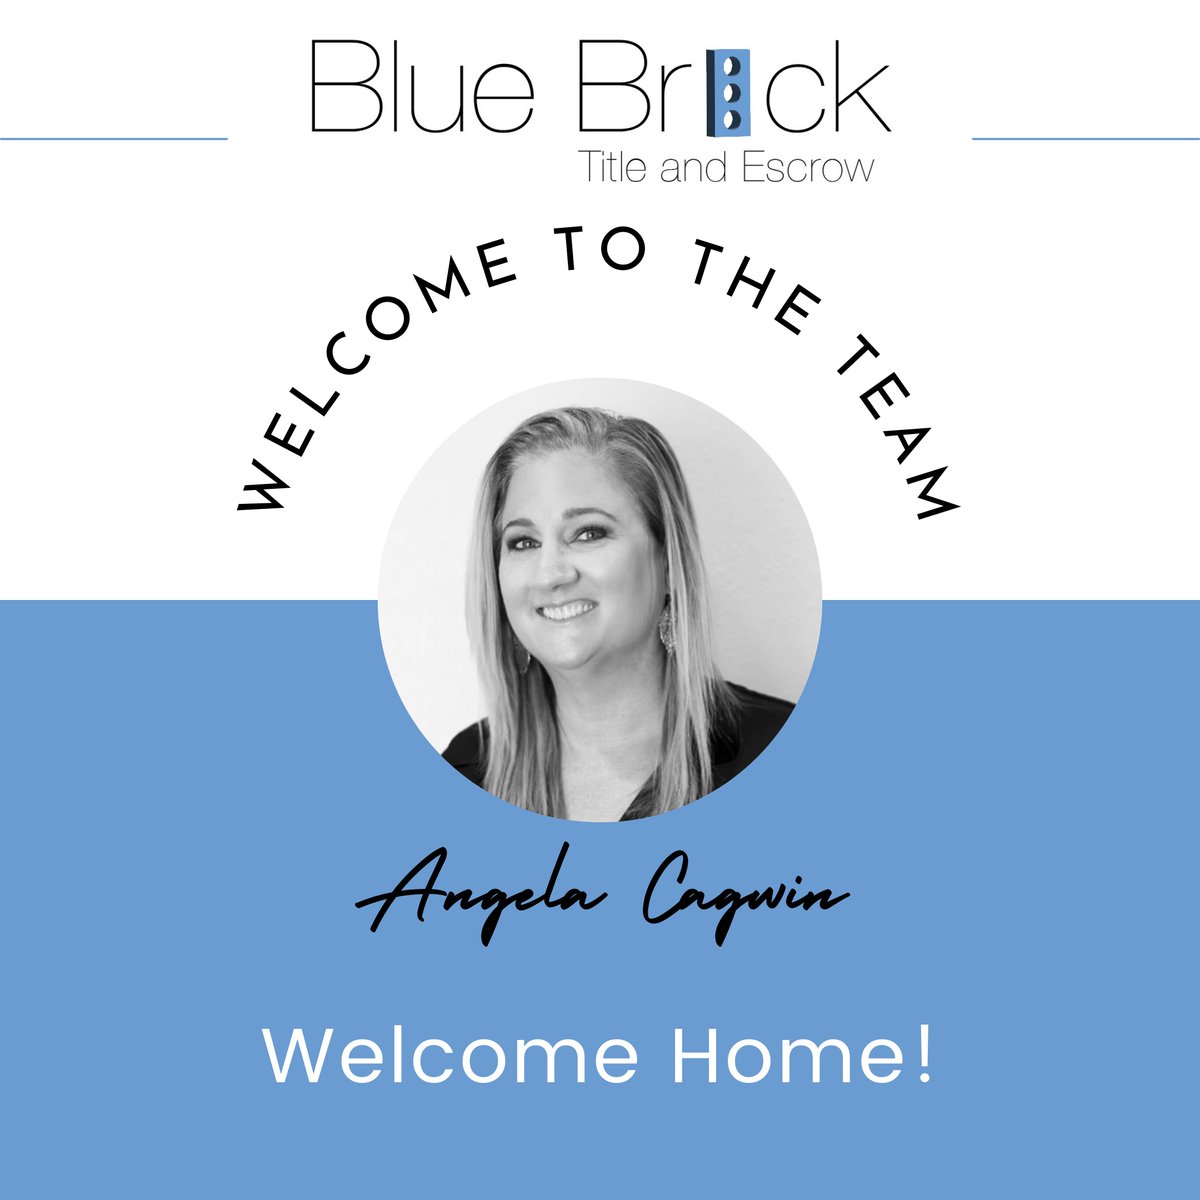 Everyone please welcome Angela Cagwin to our team, who has followed the blue brick road back home! 

Read more: openpr.com/news/3452612/a… 

#BlueBrickTitle #FollowTheBlueBrickRoad #Title #ContractToClose #titleinsurance #commitment #policy #realestate #agent #closing #closingpro...